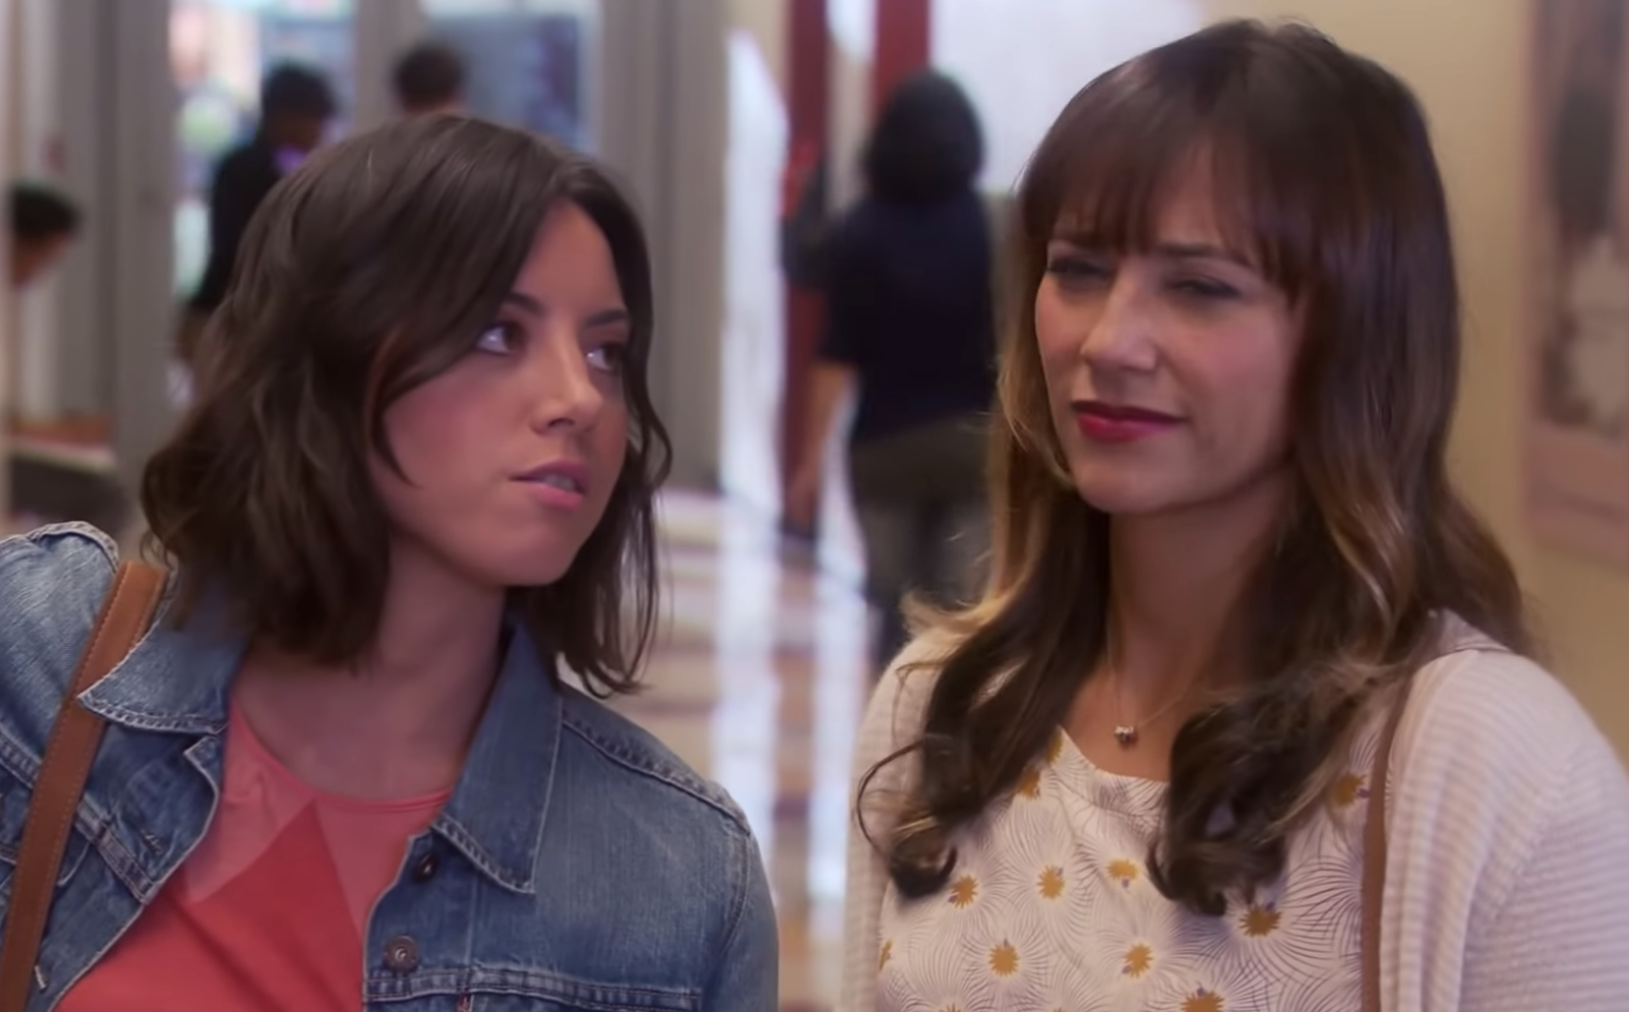 April Ludgate leans in to talk closely with Ann Perkins, who looks visibly annoyed